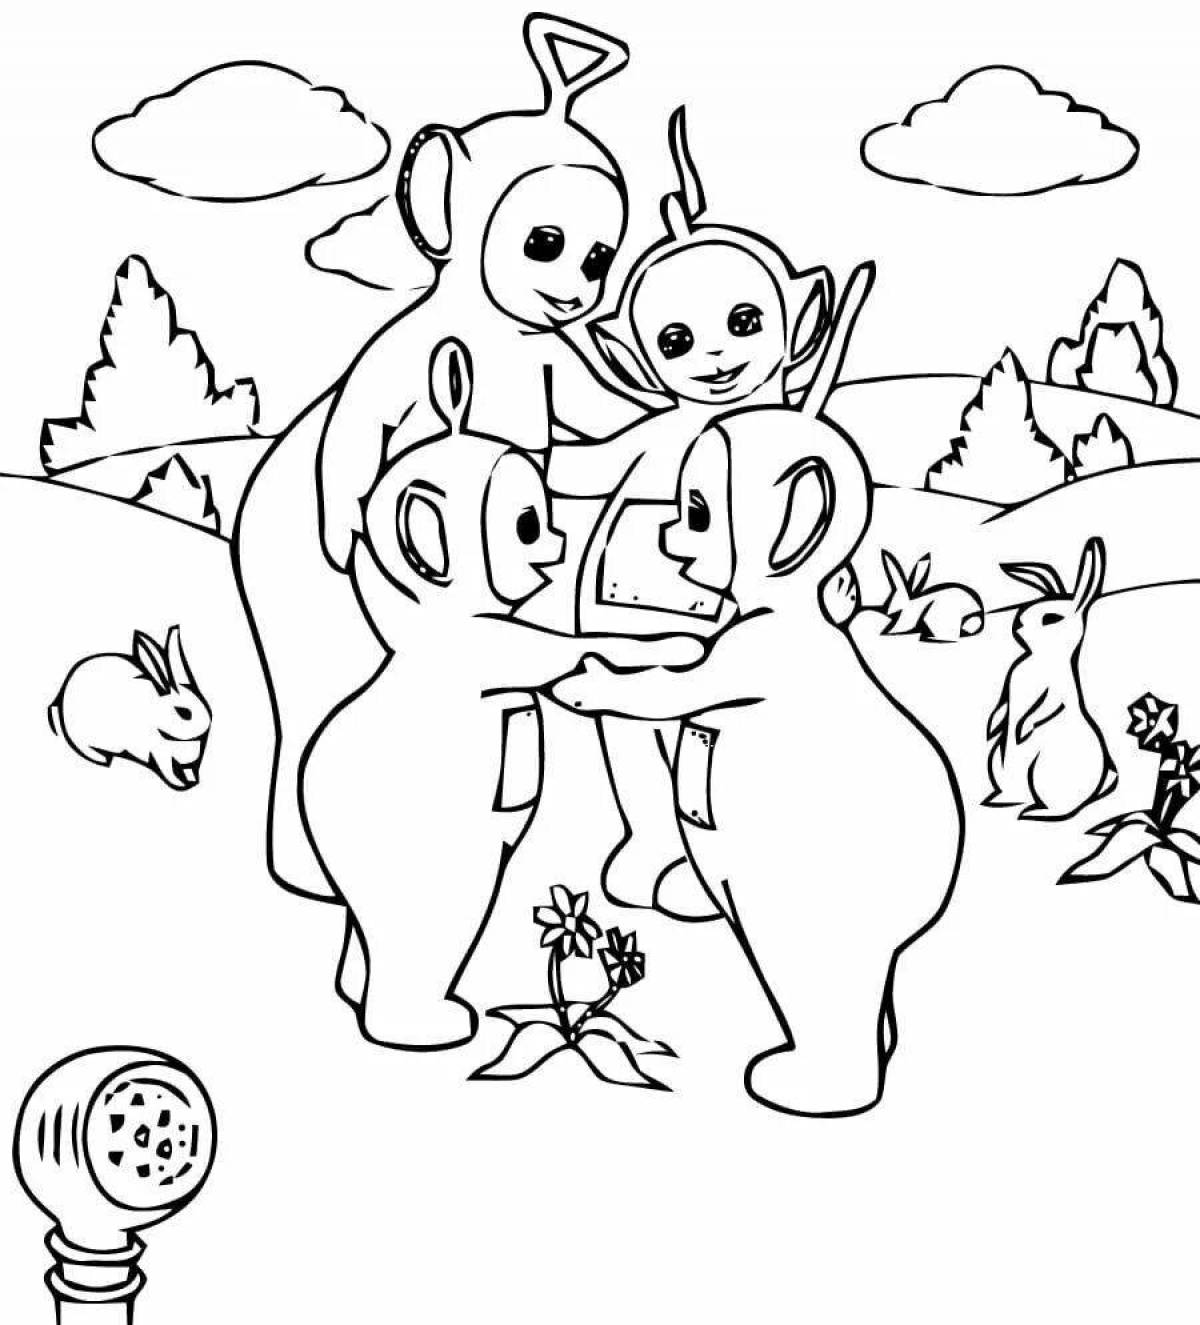 Colorful slender belly coloring page